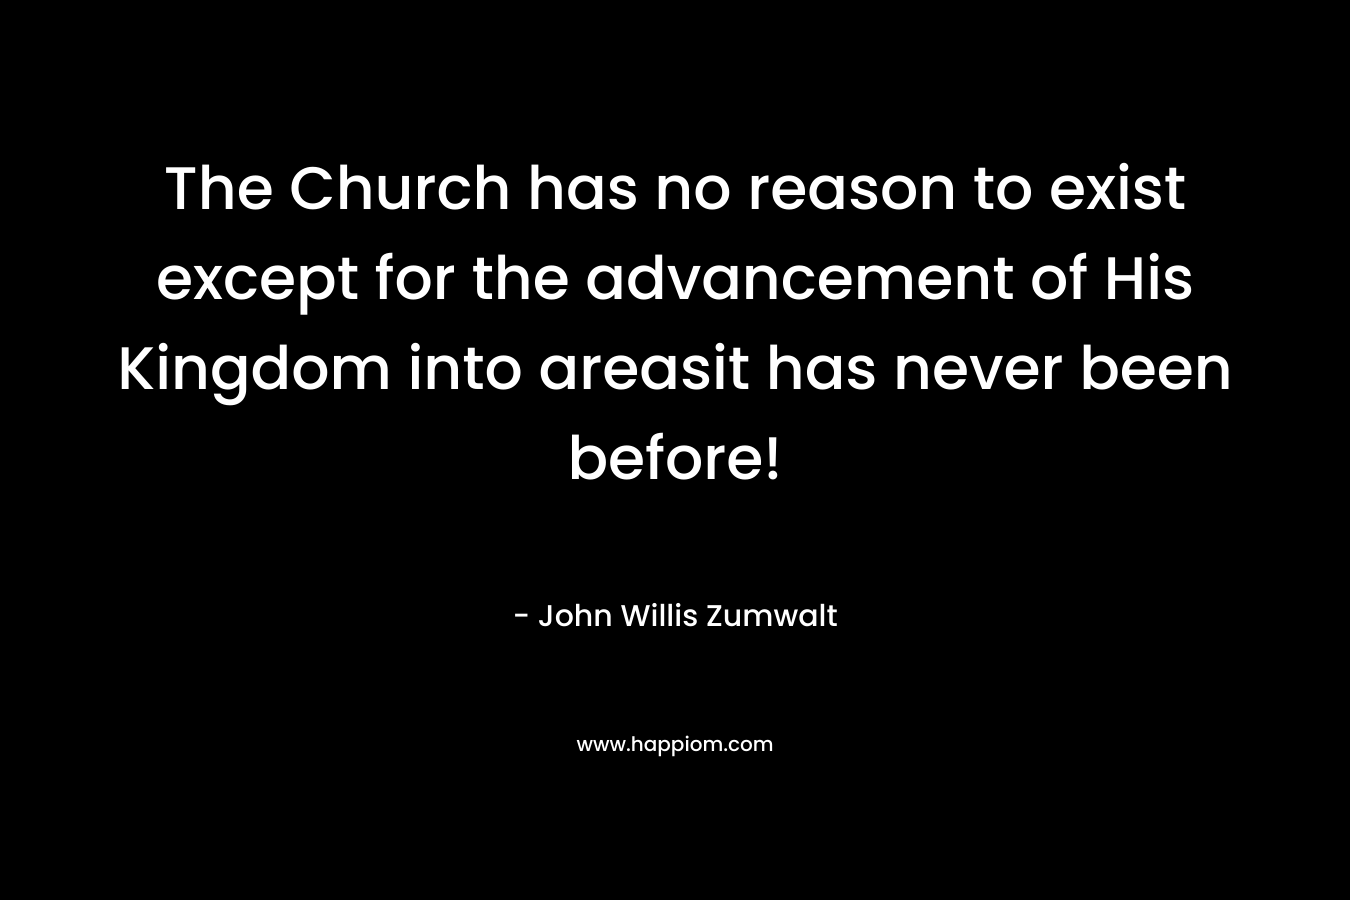 The Church has no reason to exist except for the advancement of His Kingdom into areasit has never been before! – John Willis Zumwalt